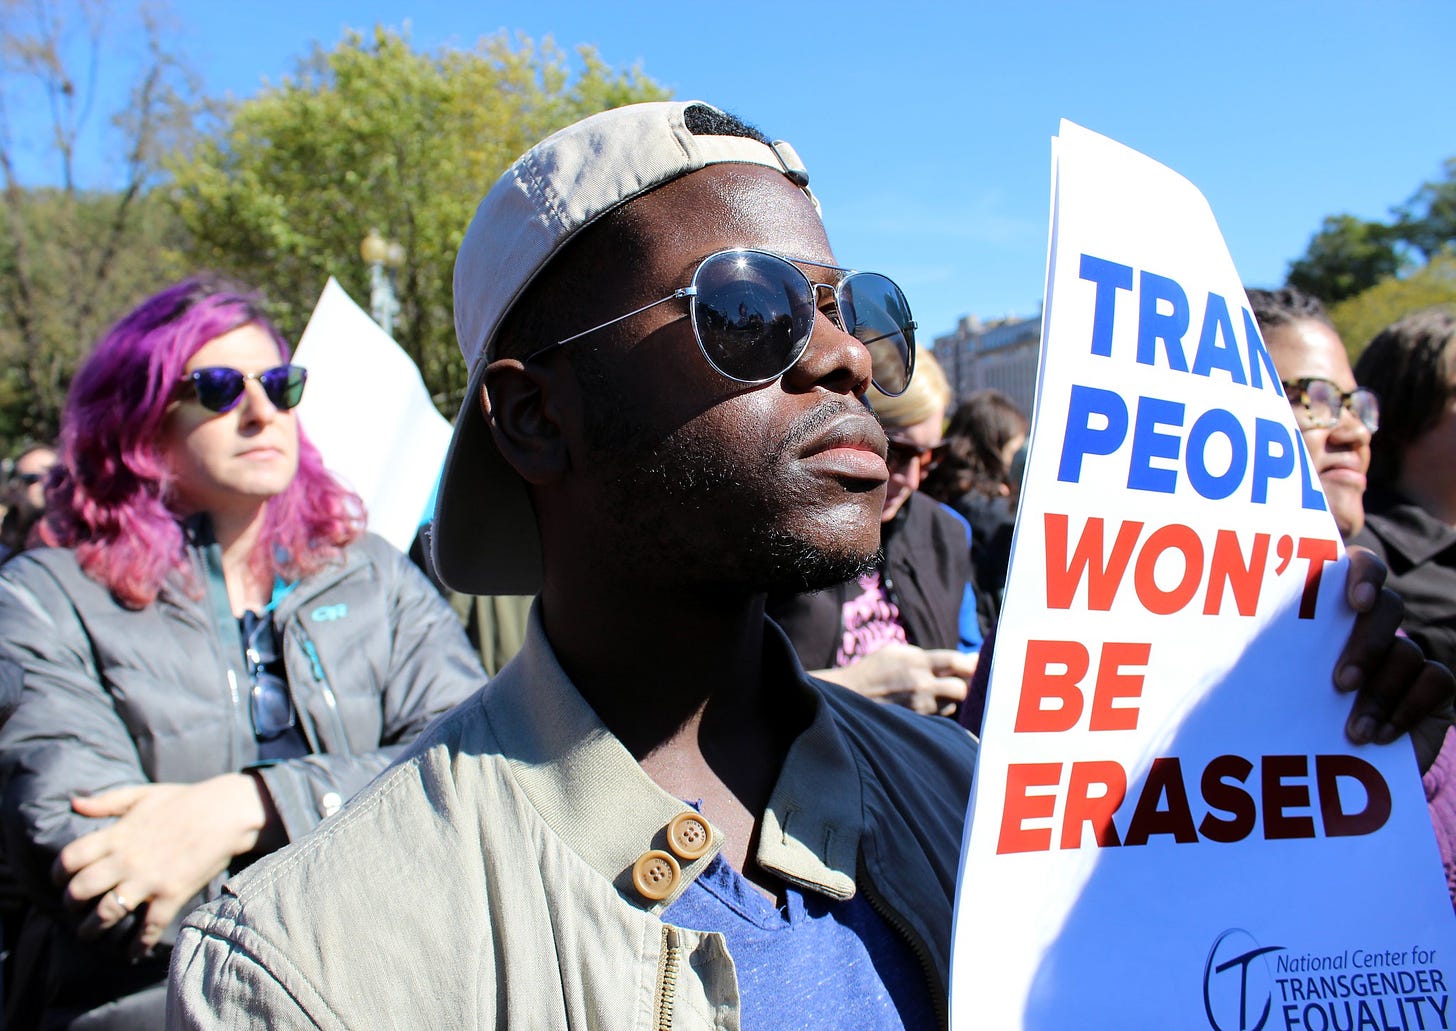 National Center for Transgender Equality TRANSGENDER RIGHTS RALLY in front of the White House at 1600 Pennsylvania Avenue, NW, Washington DC on Monday afternoon, 22 October 2018 by Elvert Barnes Protest Photography